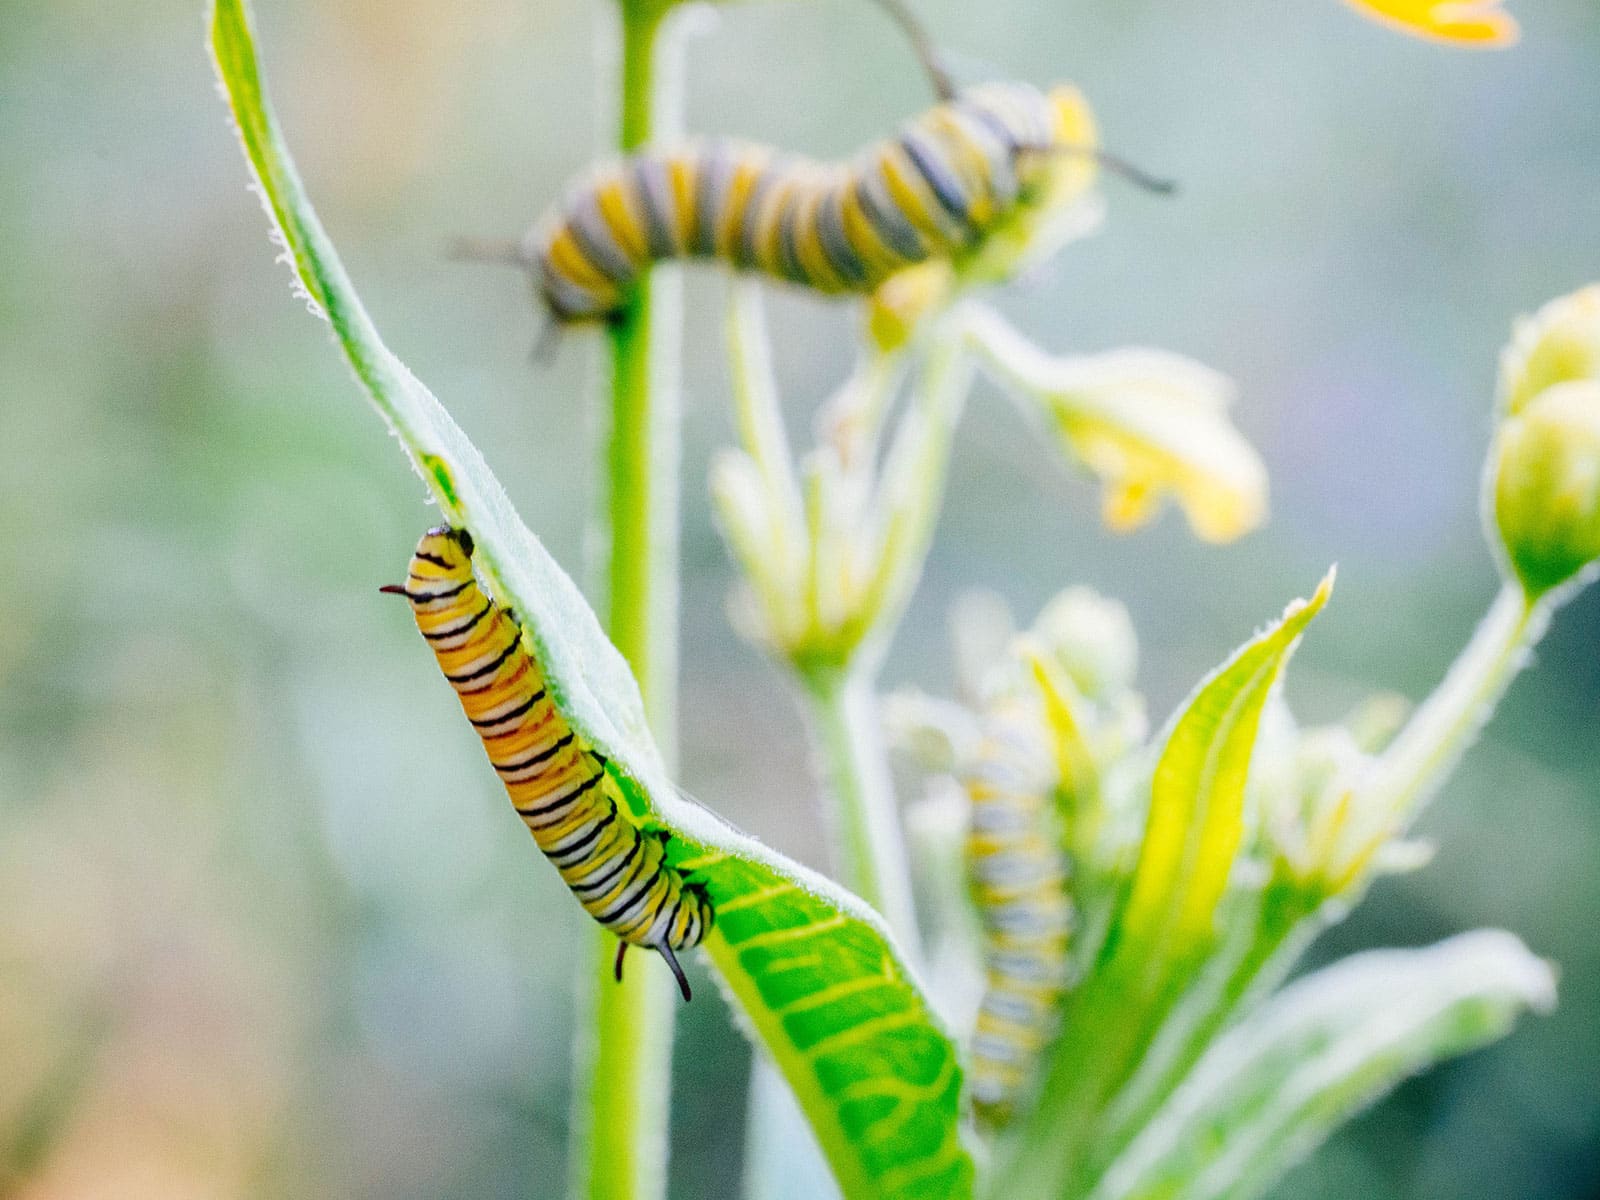 Close-up of several monarch caterpillars crawling on milkweed leaves